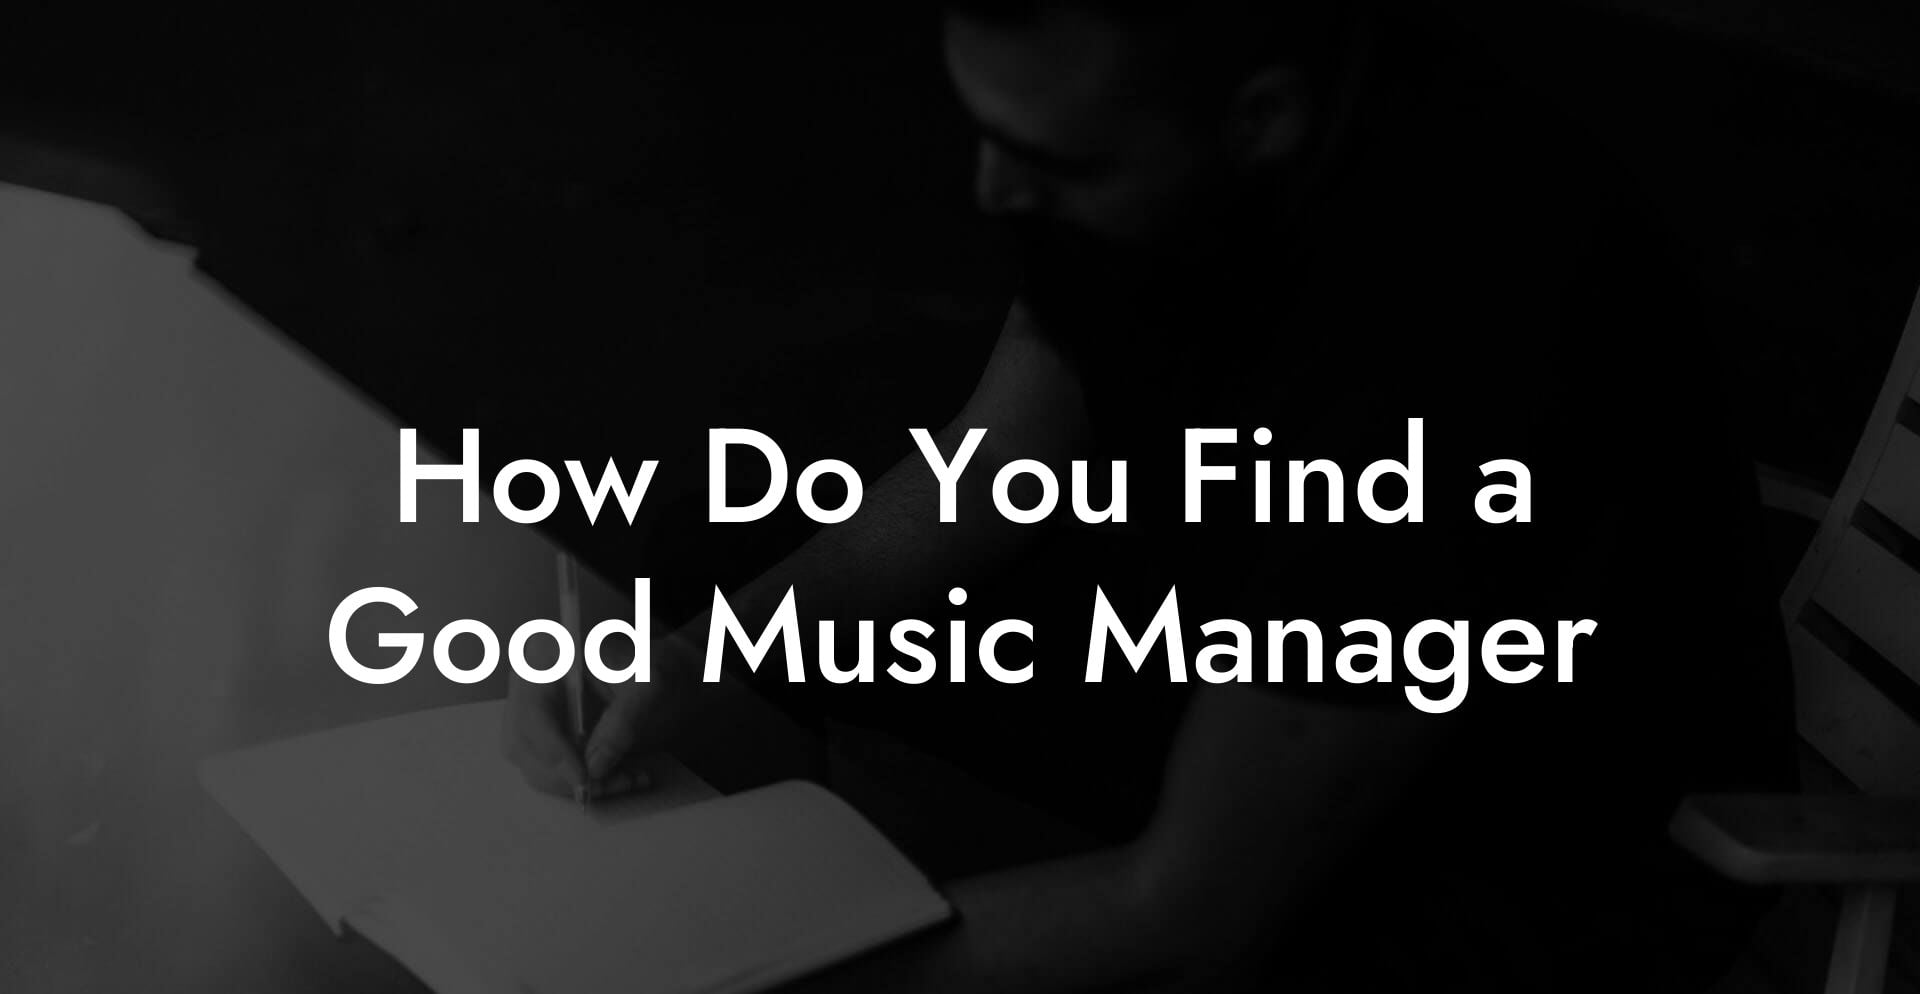 How Do You Find a Good Music Manager